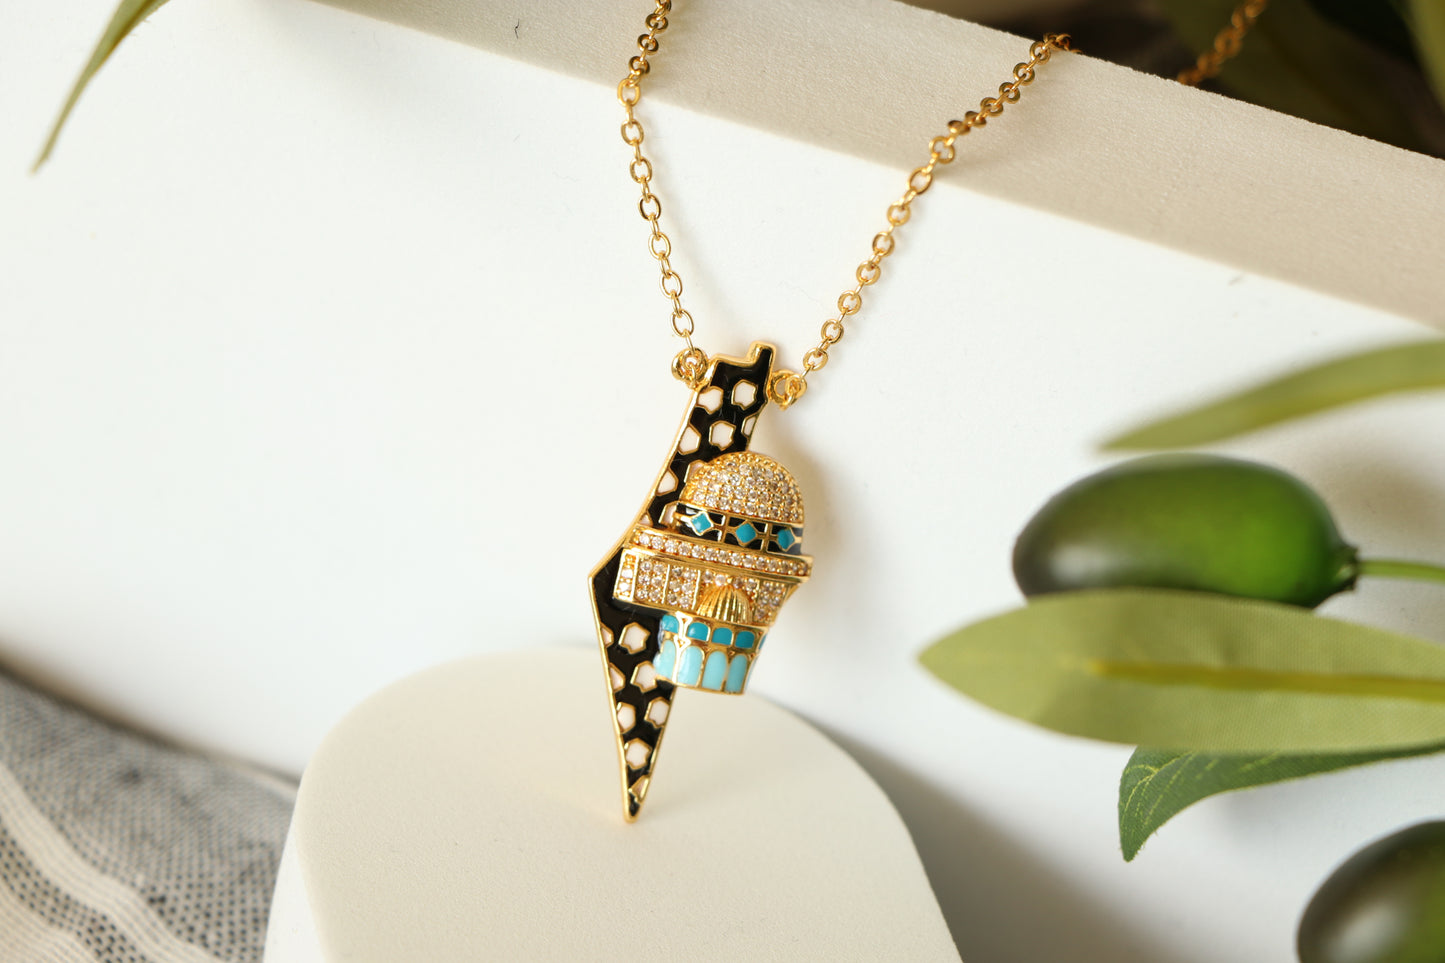 Luxury Golden Zircon Country Map and Al-Aqsa Mosque by Palestinian keffiyeh colors - Pendant Necklace